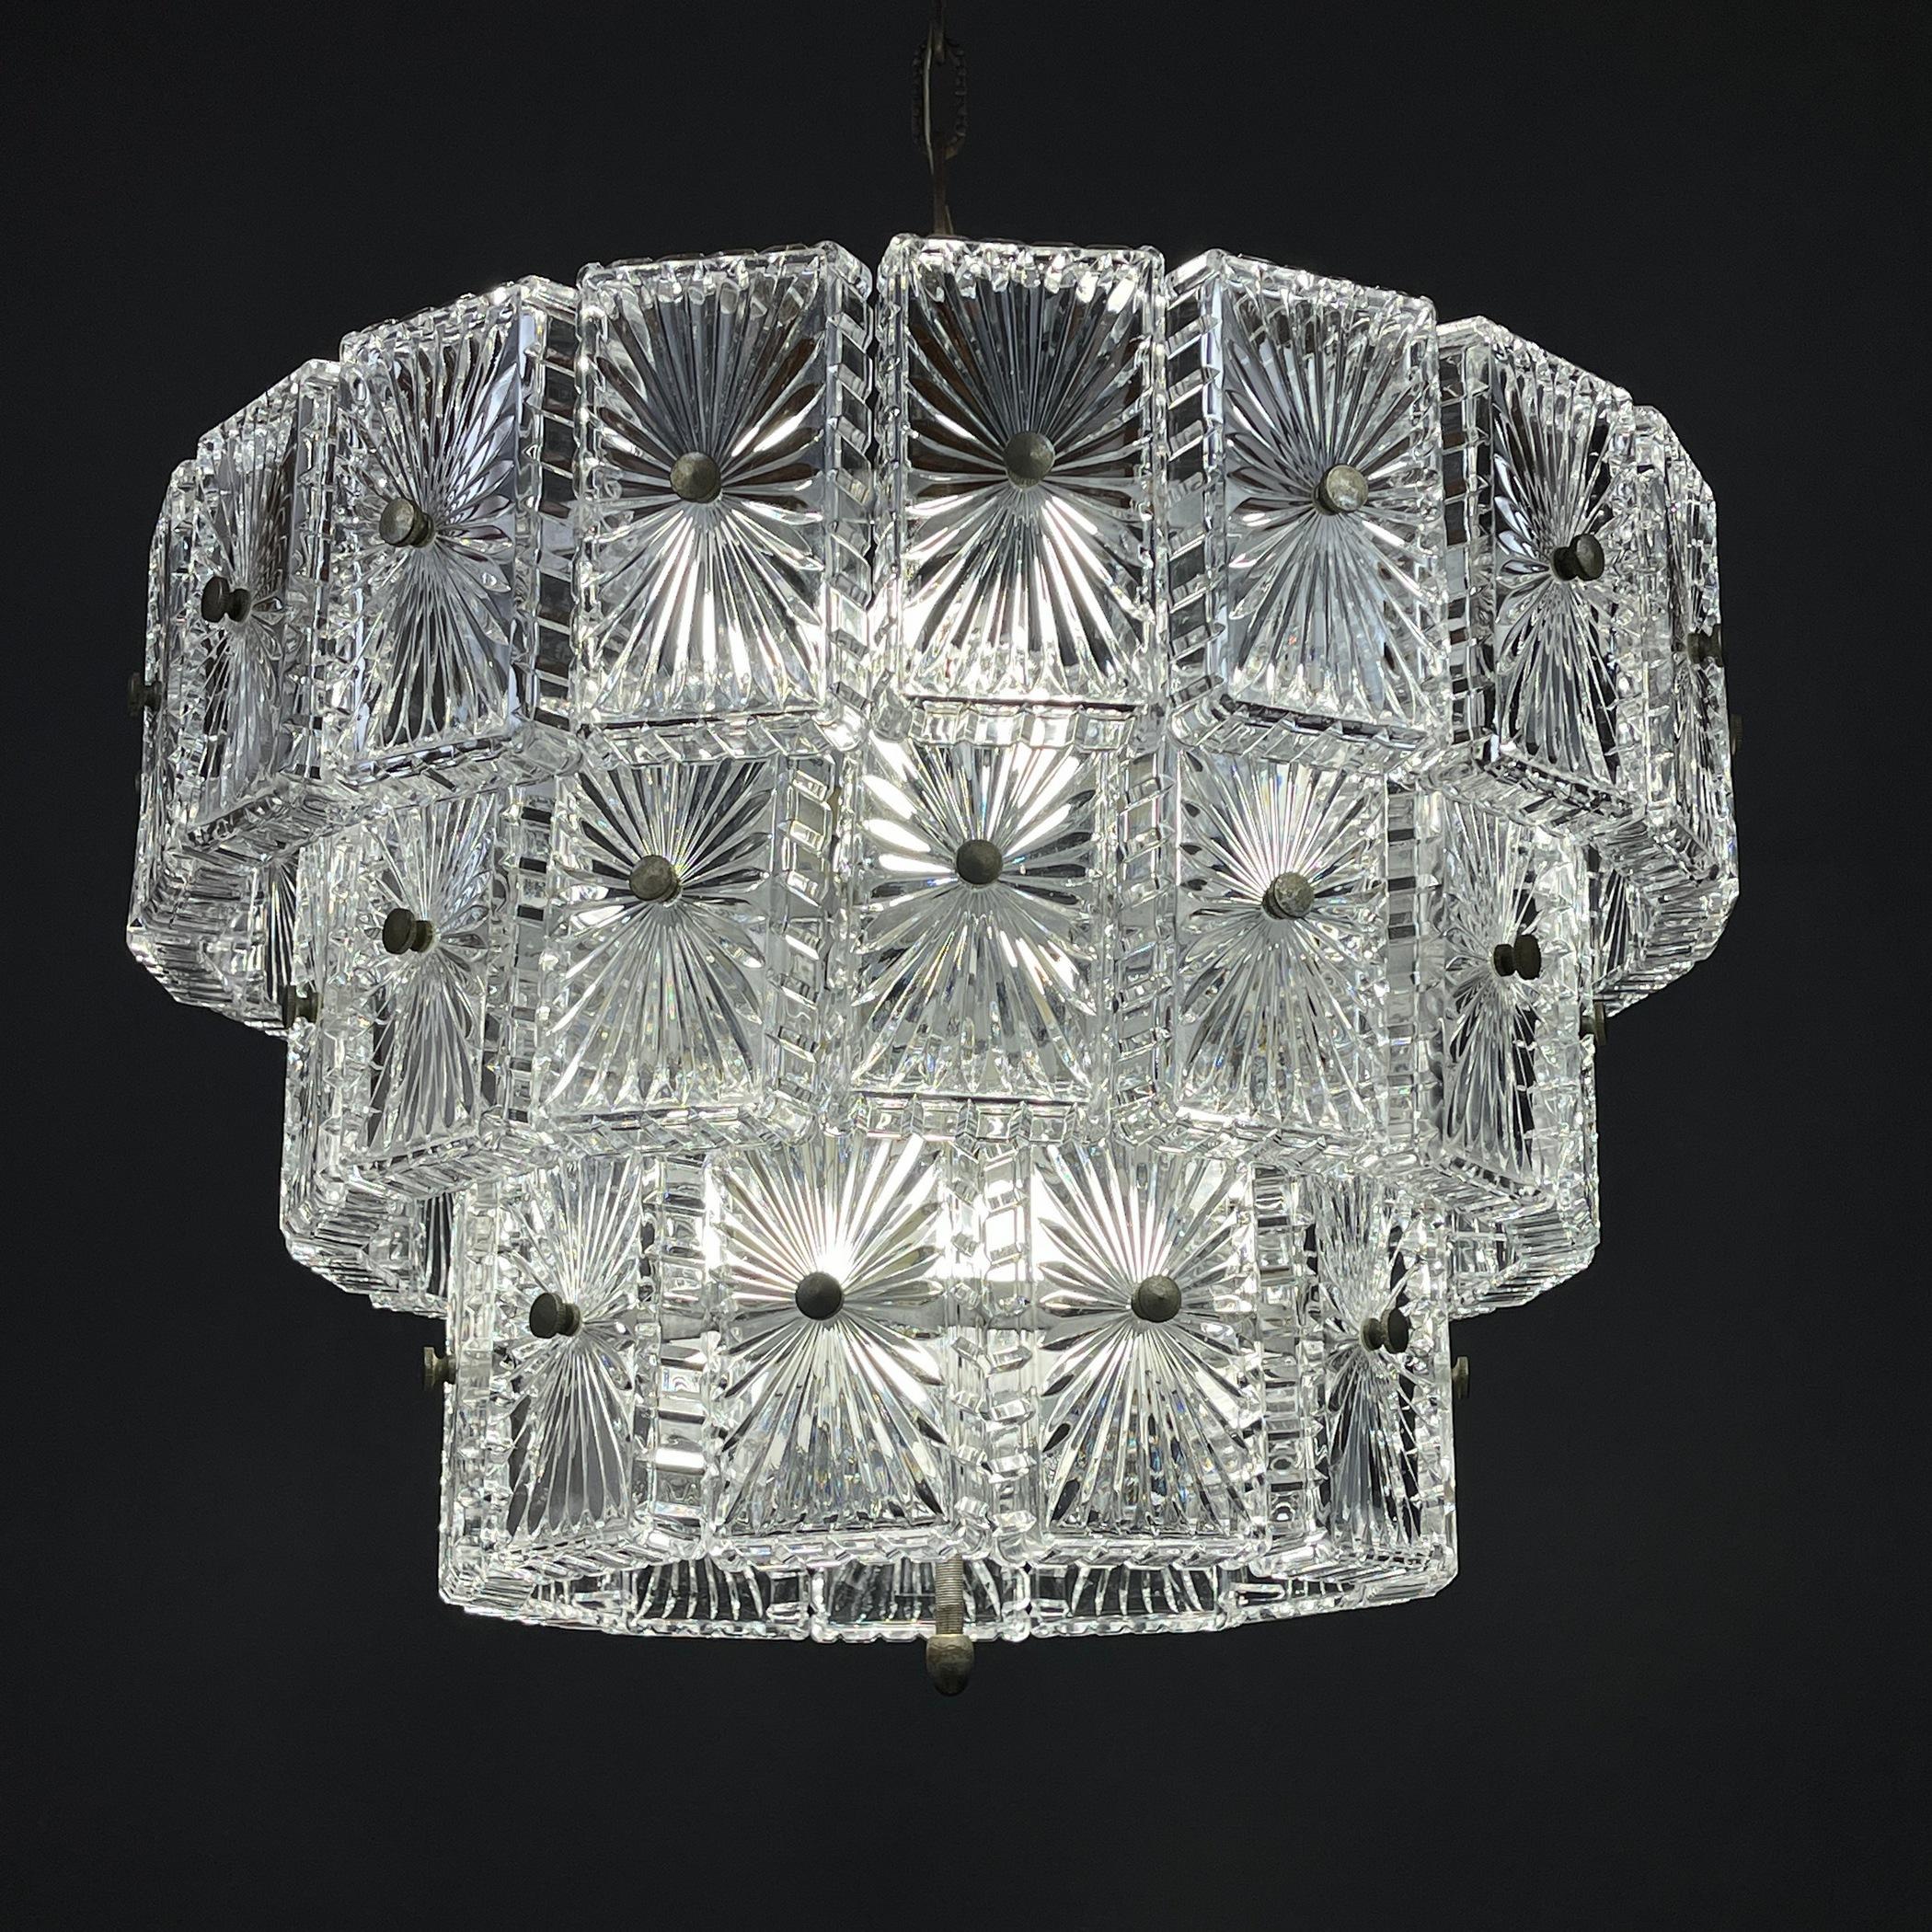 Unique vintage large crystal chandelier made in Italy in the 1960s. Three-tier metal base and 45 glass elements. The chandelier has a simple, clean design that makes it the perfect choice to decorate and illuminate any room of the house in a refined